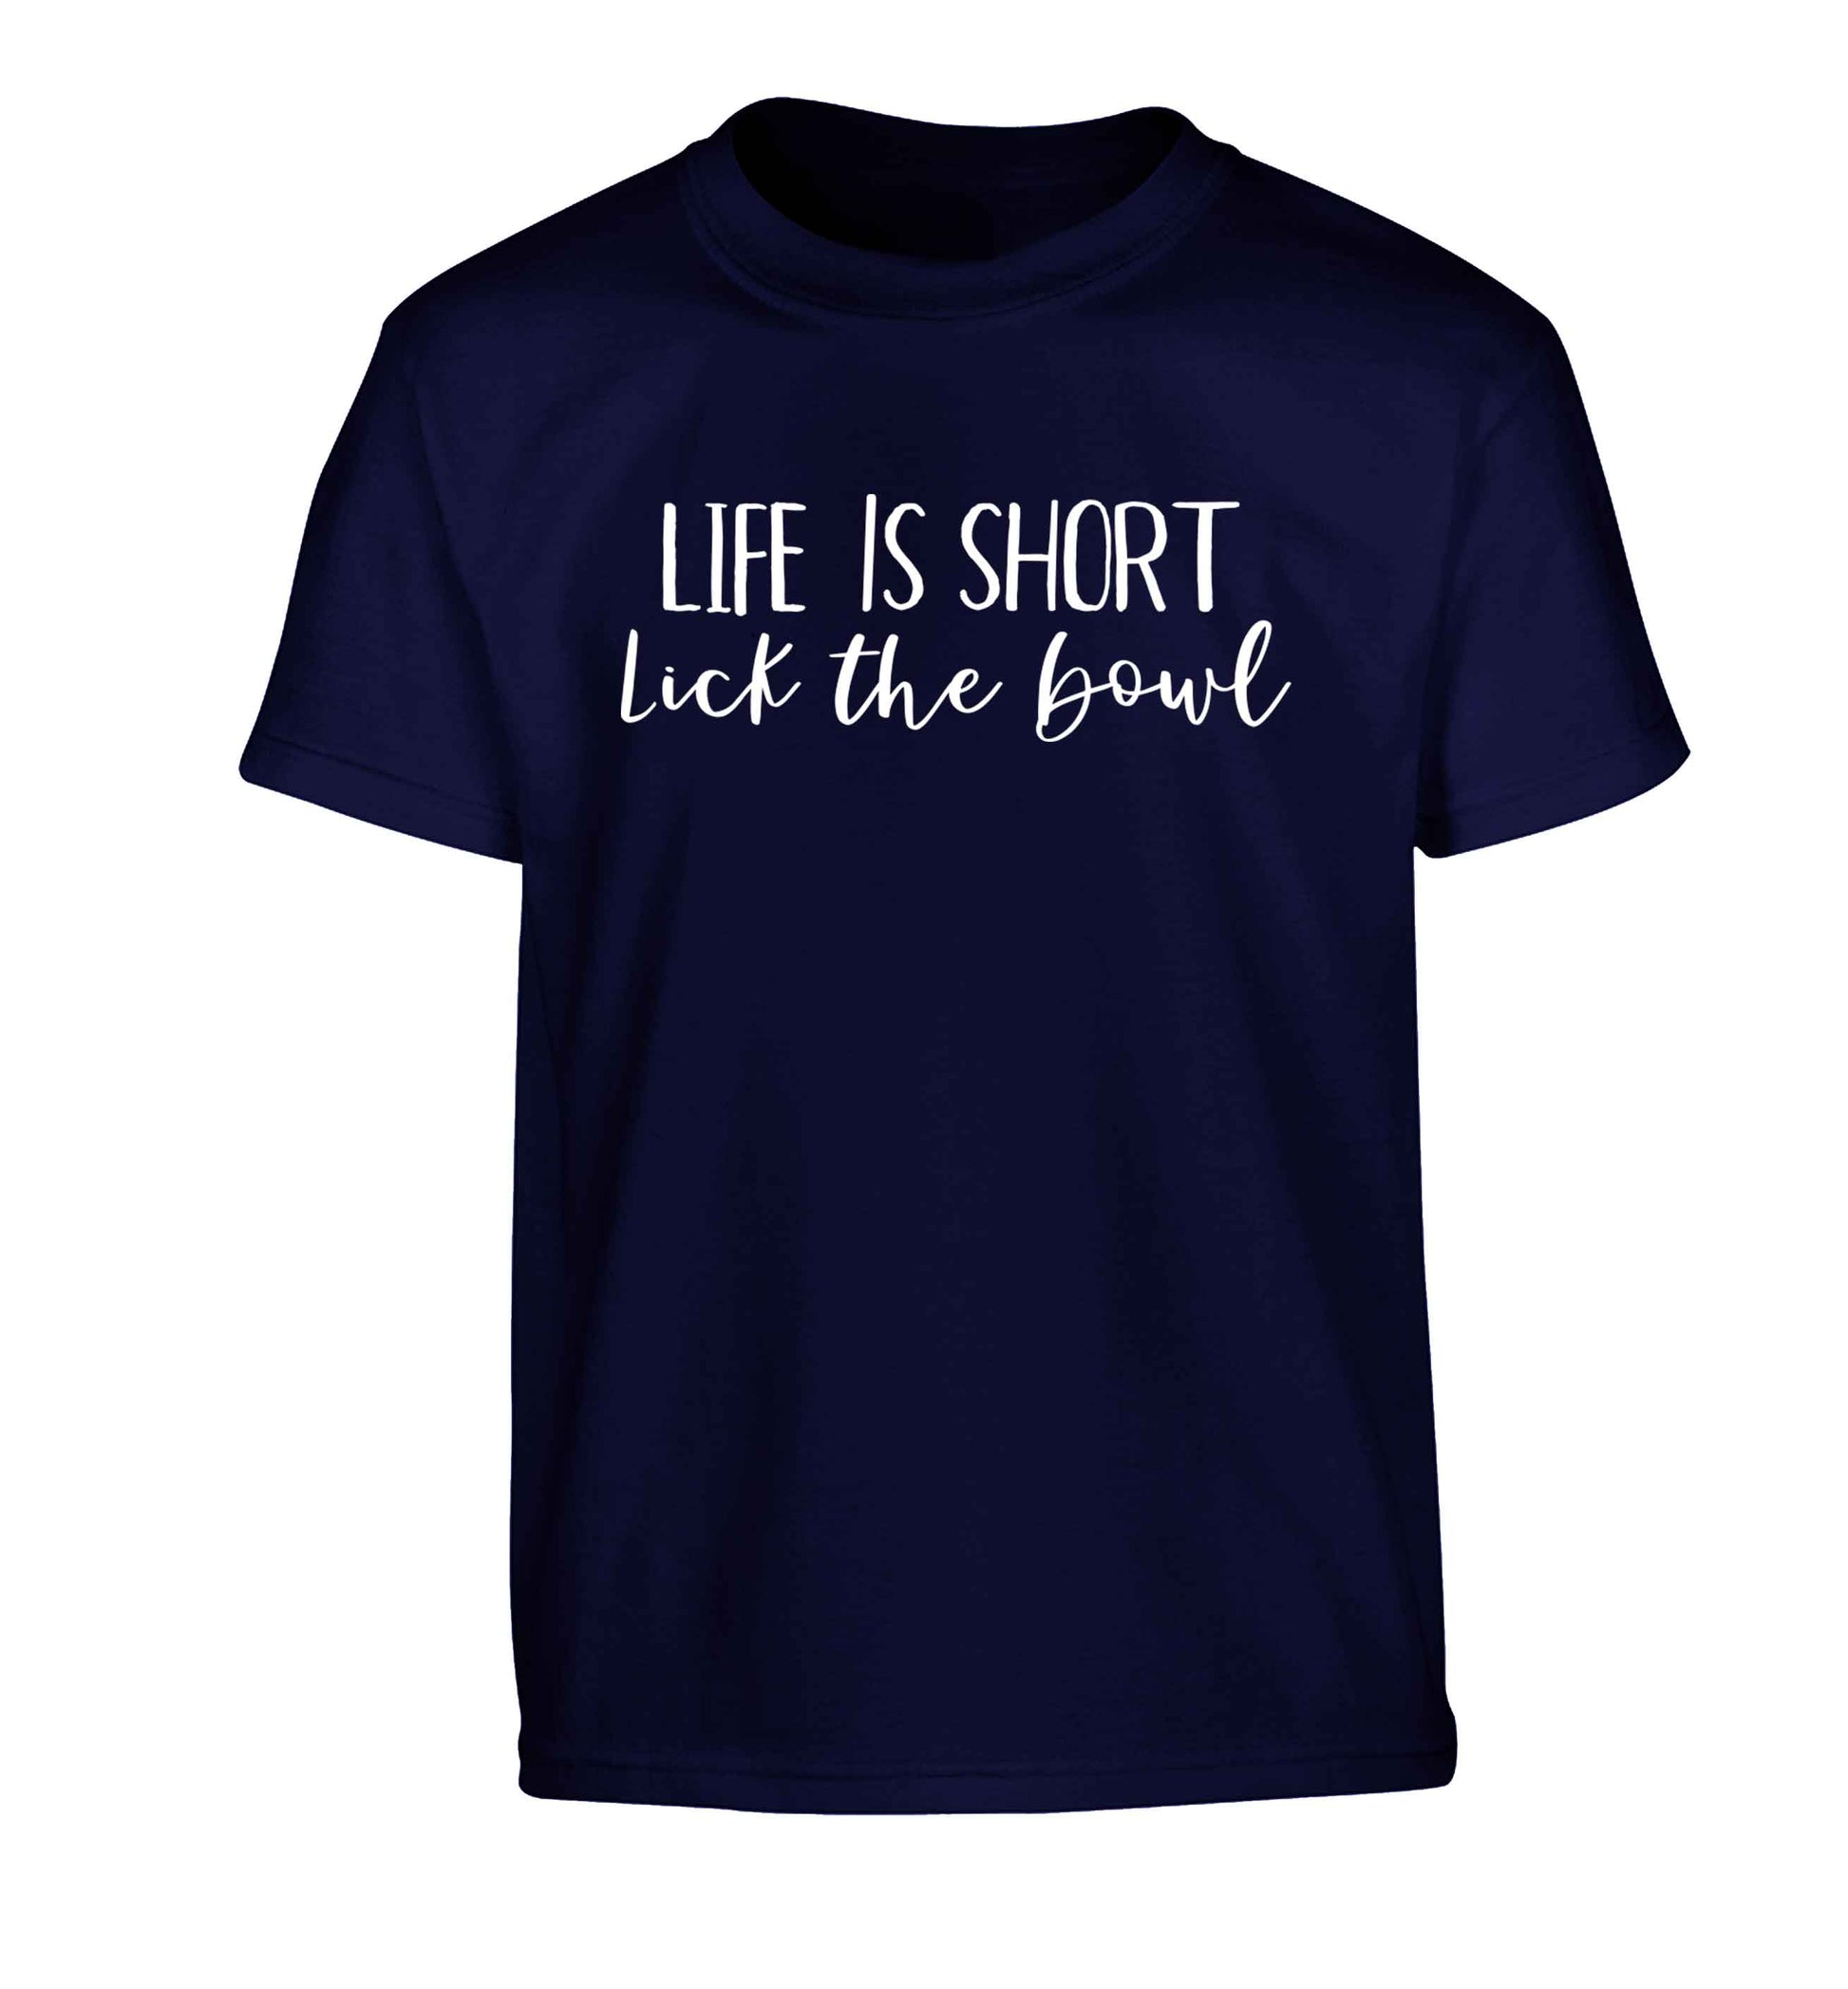 Life is short lick the bowl Children's navy Tshirt 12-13 Years